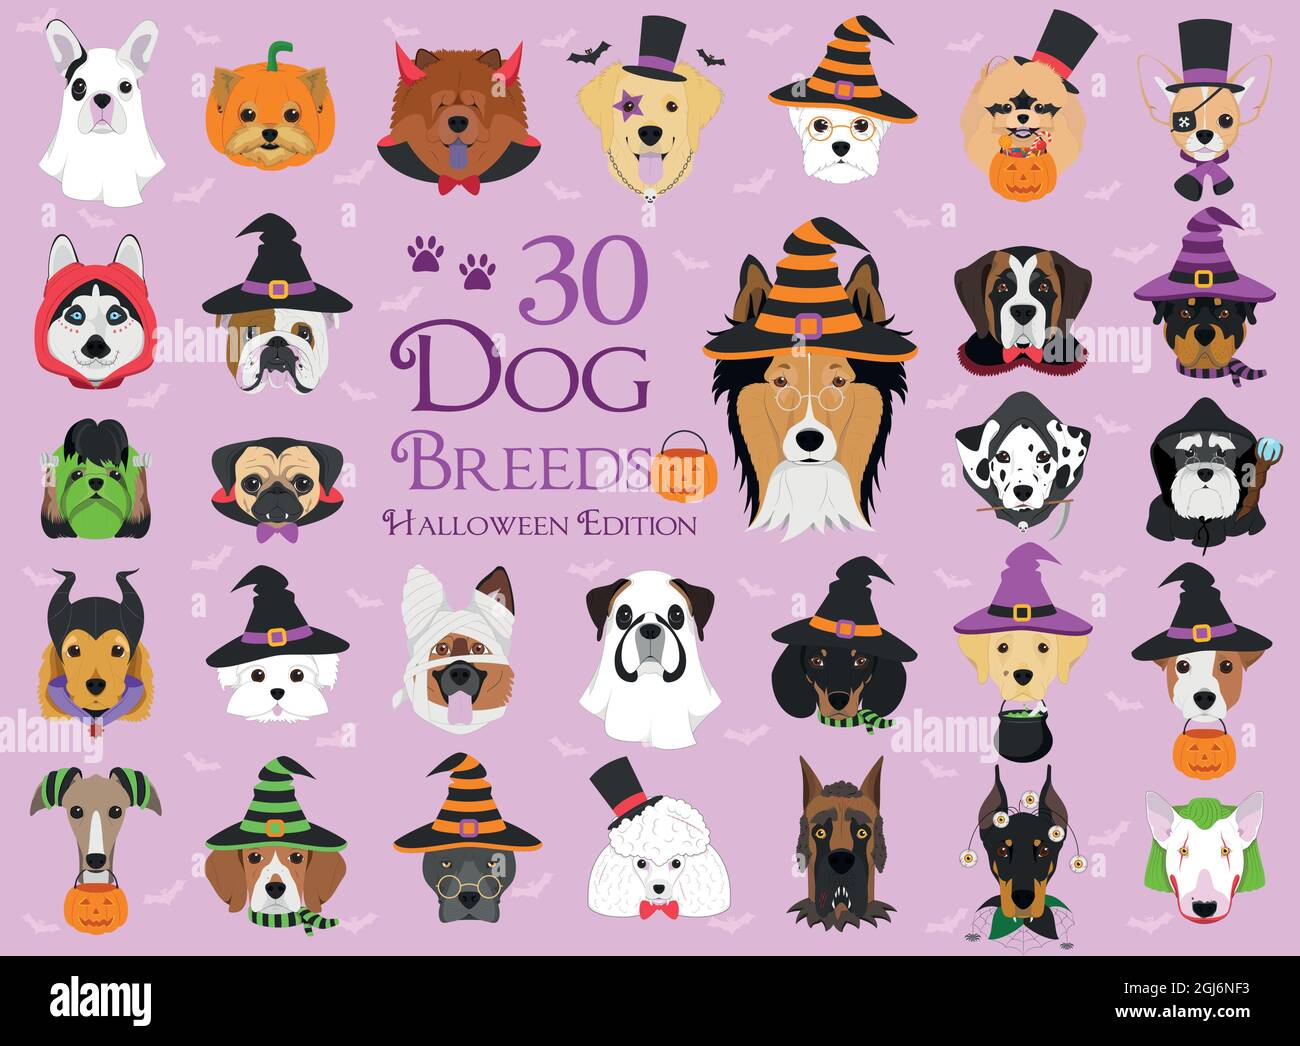 Set of 30 dog breeds with Halloween costumes Stock Vector